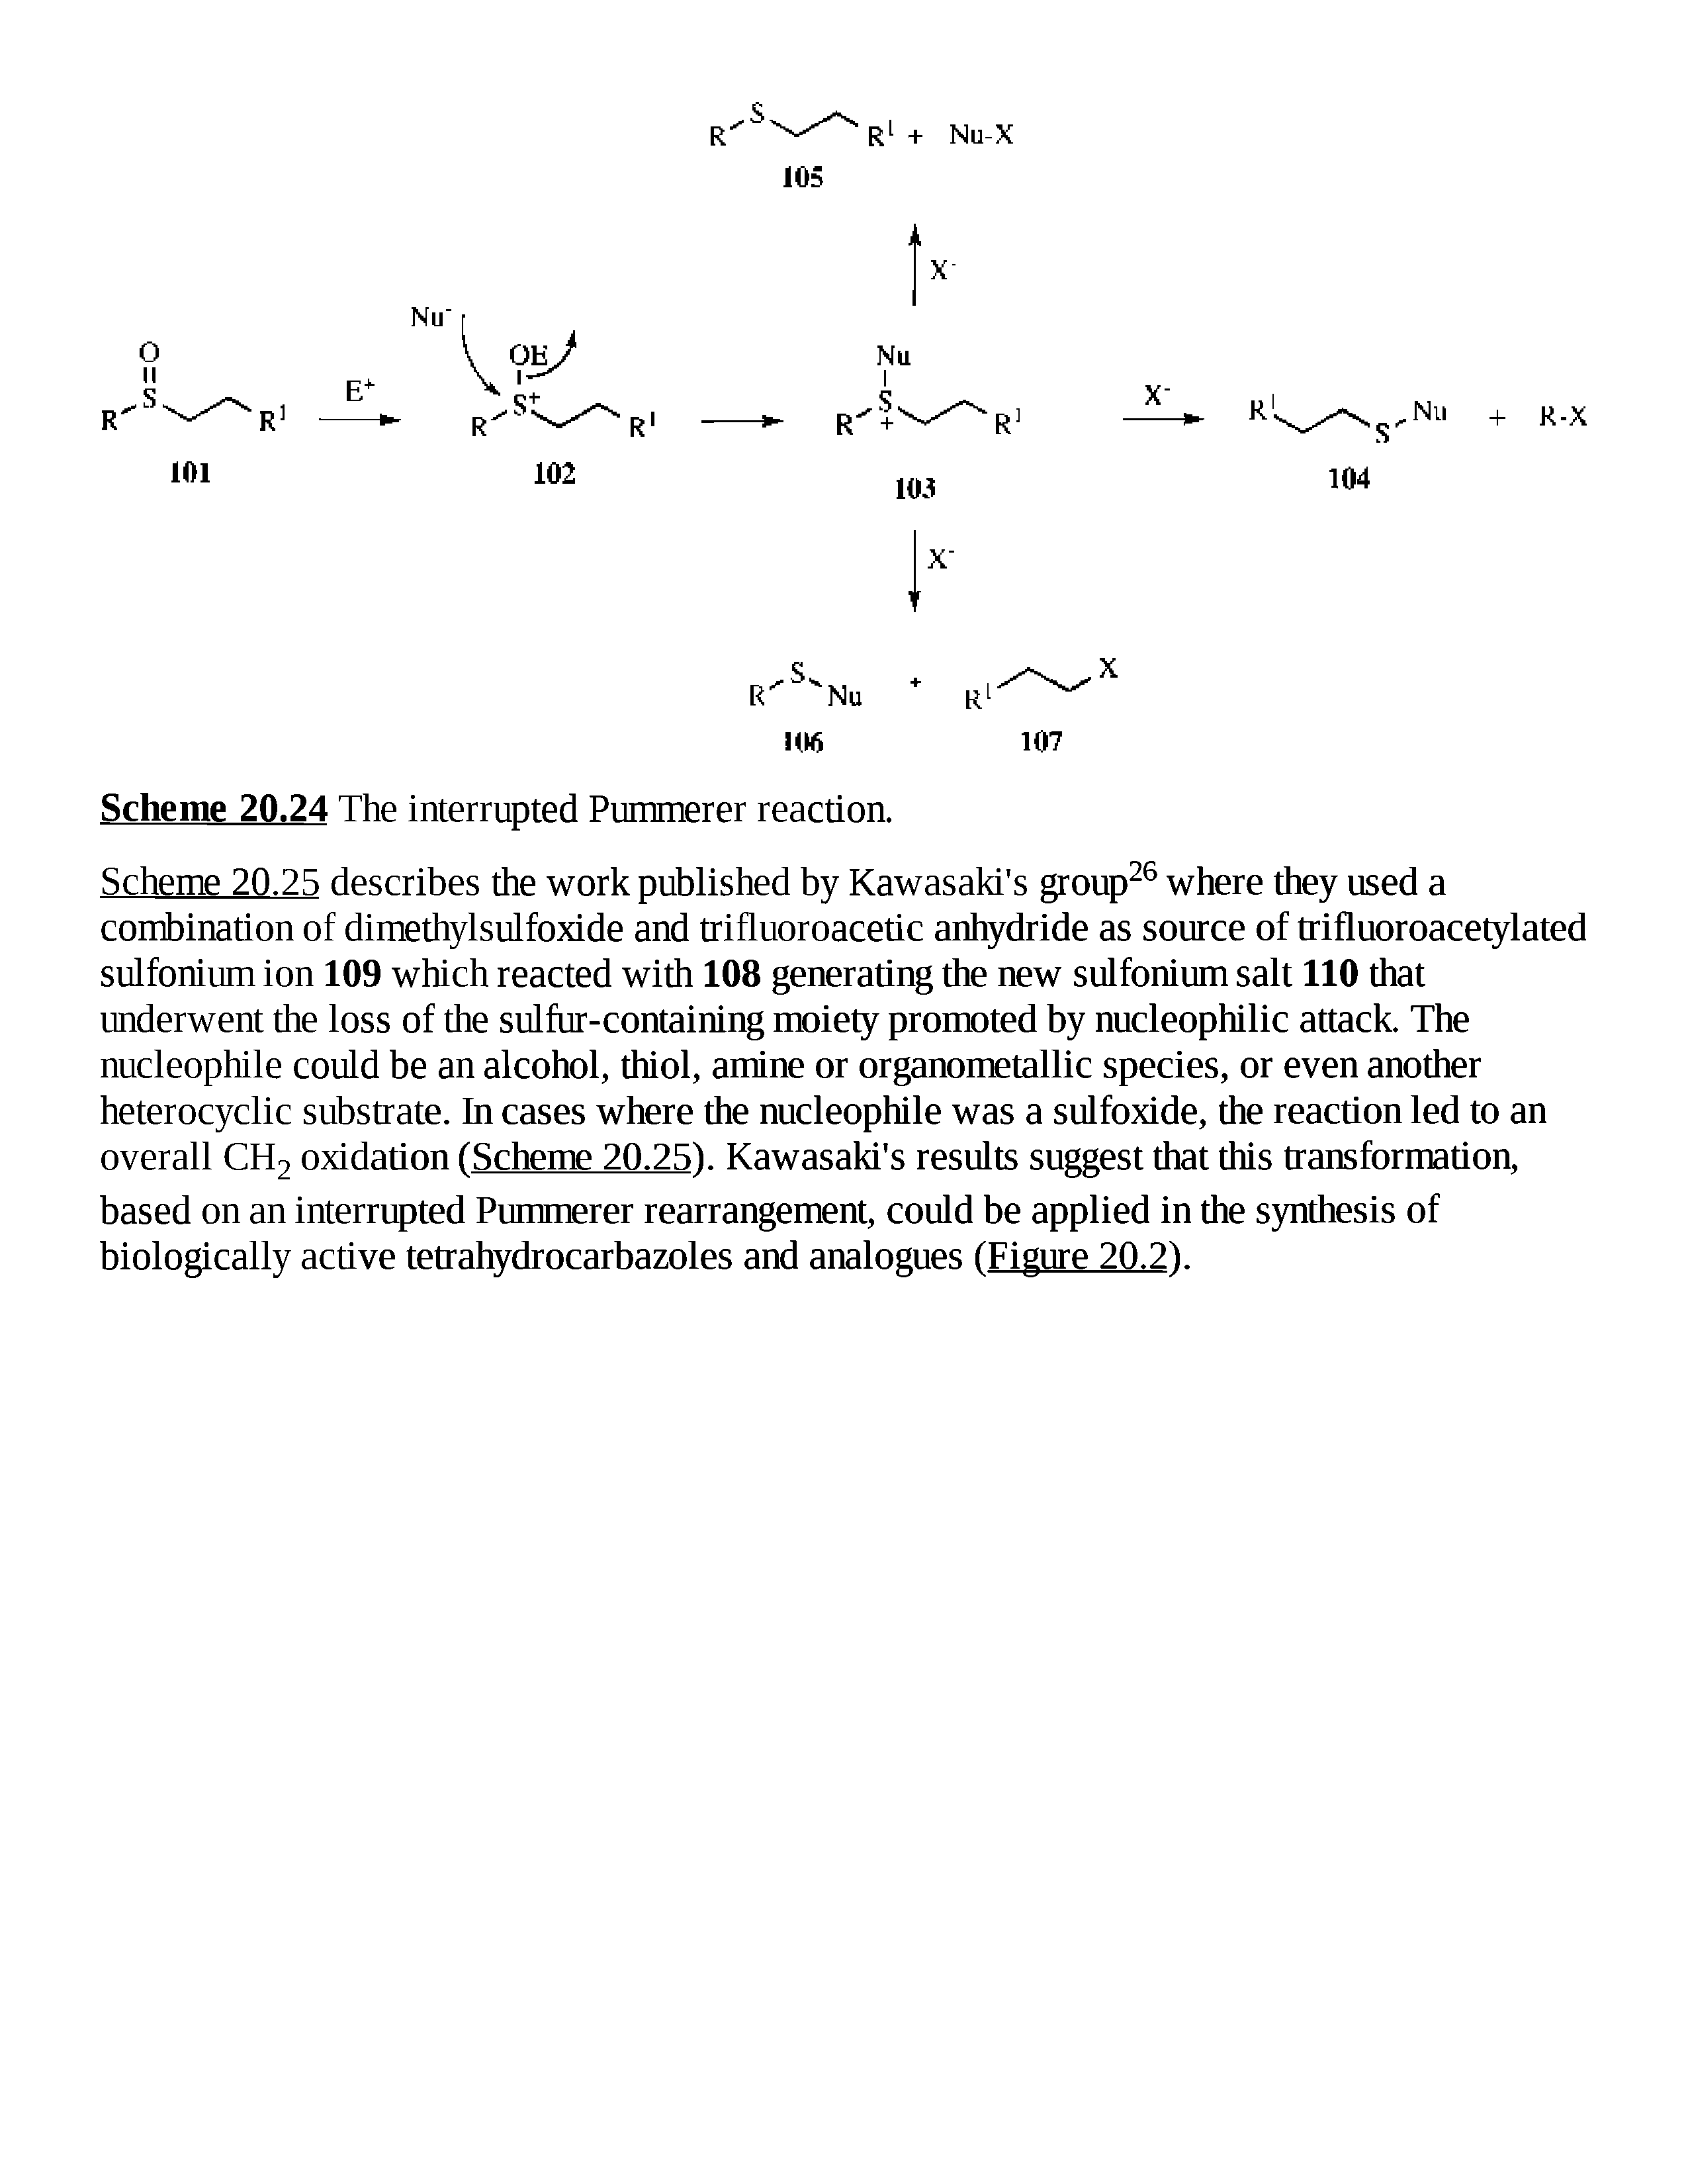 Scheme 20.2S describes the work published by Kawasaki s group where they used a combination of dimethylsulfoxide and trifluoroacetic anhydride as source of trifluoroacetylated sulfonium ion 109 which reacted with 108 generating the new sulfonium salt 110 that underwent the loss of the sulfur-containing moiety promoted by nucleophilic attack. The nucleophile could be an alcohol, thiol, amine or organometallic species, or even another heterocyclic substrate. In cases where the nucleophile was a sulfoxide, the reaction led to an overall CH2 oxidation (Scheme 20.2S). Kawasaki s results suggest that this transformation, based on an interrupted Pummerer rearrangement, could be applied in the synthesis of biologically active tetrahydrocarbazoles and analogues fFigure 20.2T...